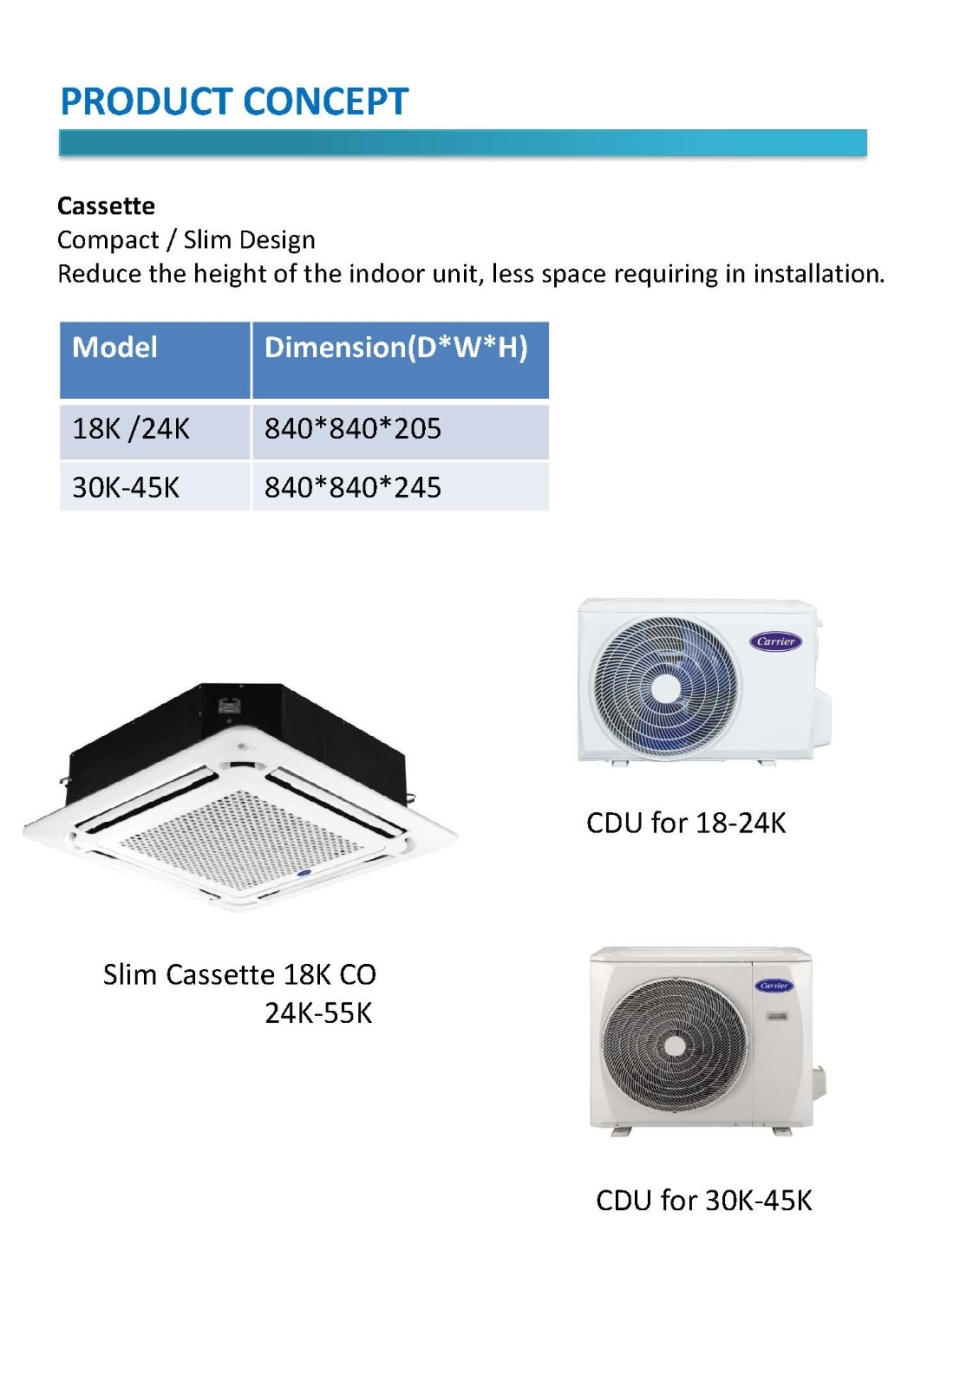 CARRIER LIGHT COMMERCIAL AIR CONDITIONER SINGLE SPLIT (CEILING CASSETTE)  R32 REFRIGERANT CARRIER Air-Conditioner Products Subang Jaya, Selangor,  Kuala Lumpur (KL), Malaysia. Supplier, Supplies, Manufacturer, Wholesaler |  Culmi Air-Cond & Refrigeration ...